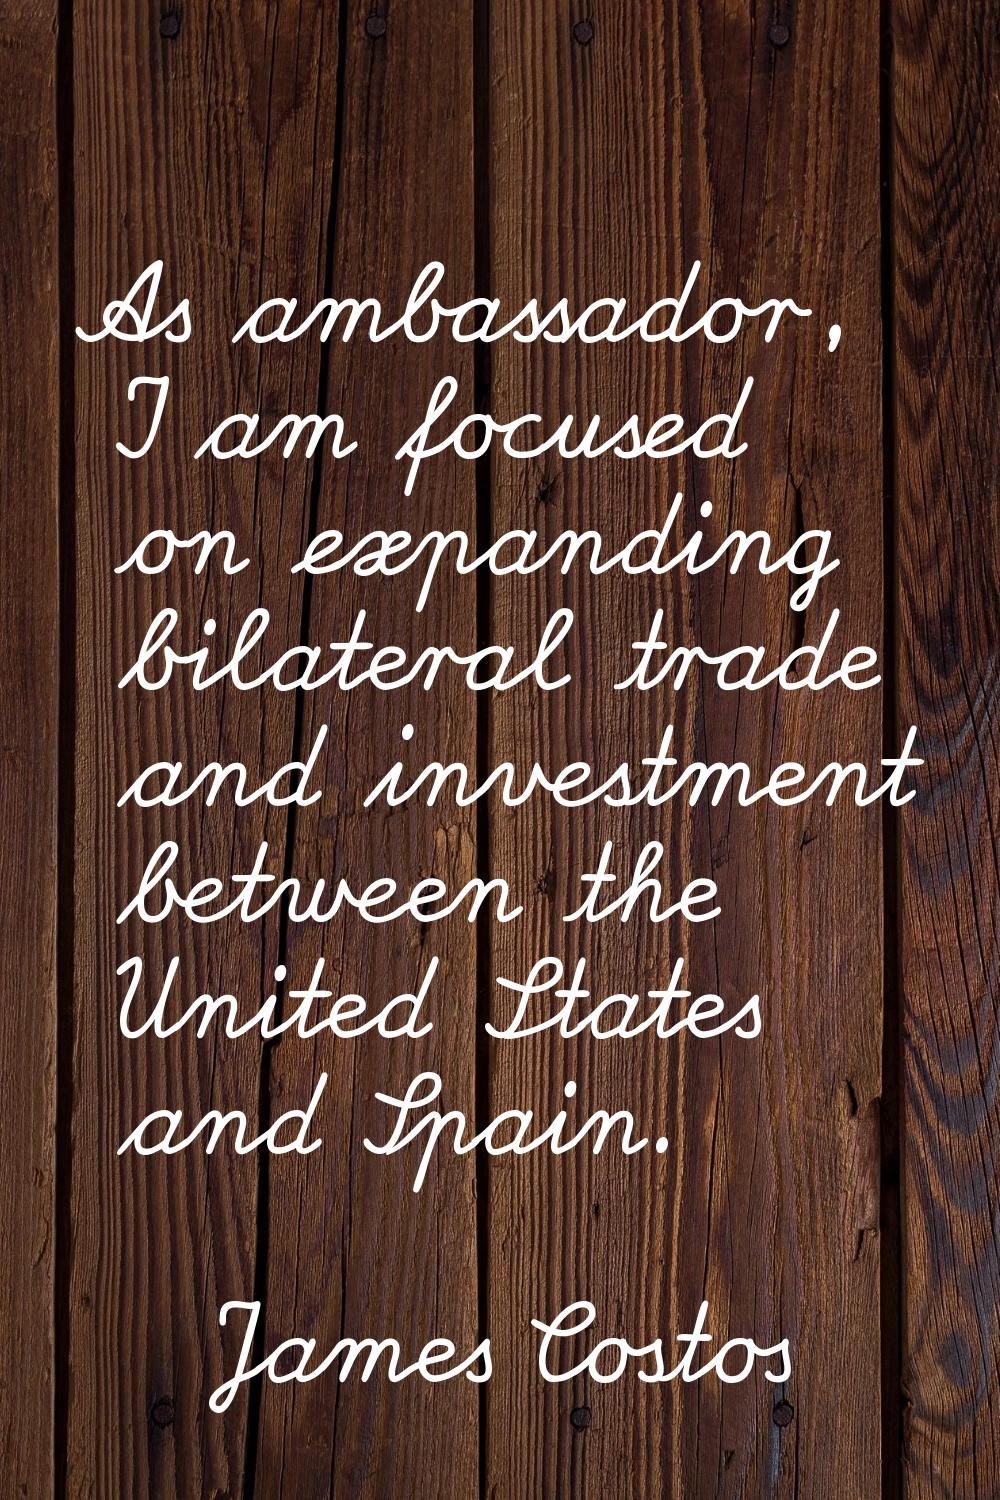 As ambassador, I am focused on expanding bilateral trade and investment between the United States a